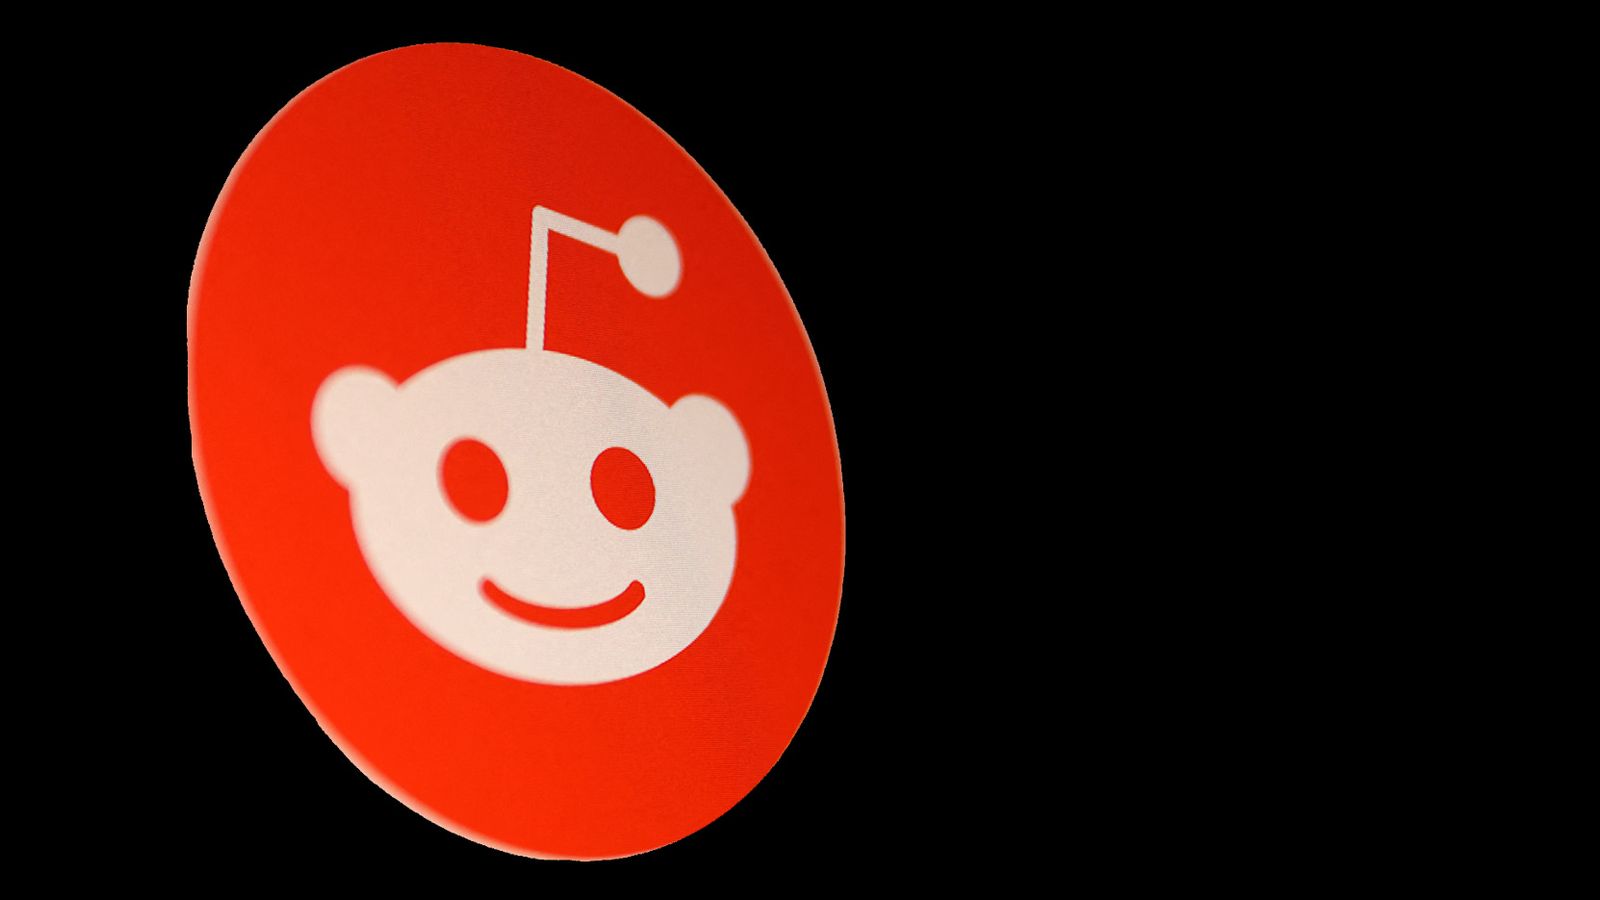 Reddit blackout: Thousands of communities are doing dark today - here's why